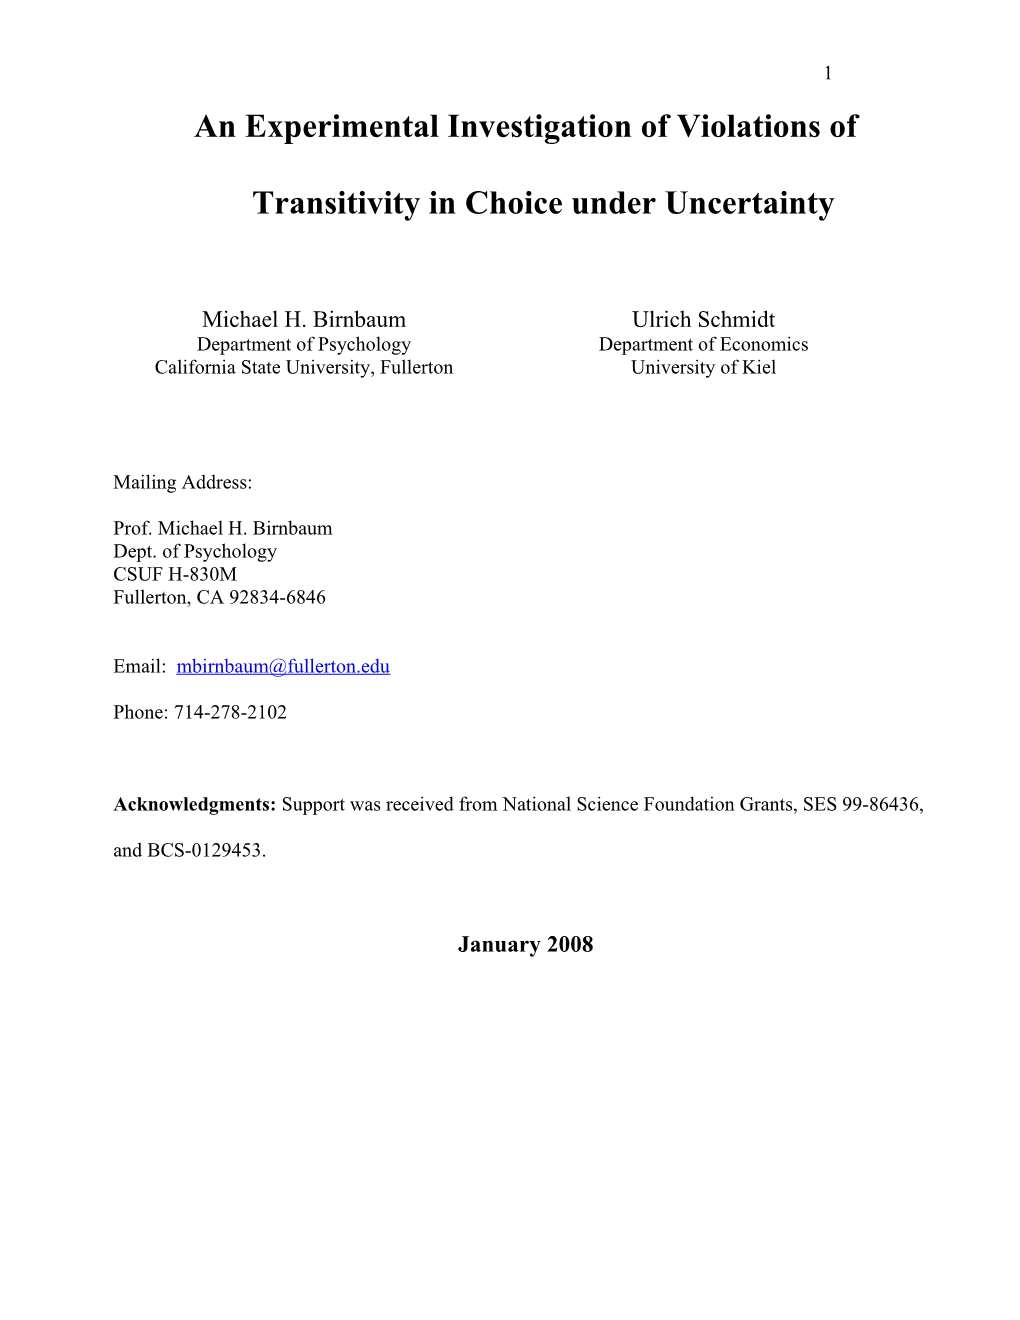 An Experimental Investigation of Violations of Transitivity in Choice Under Uncertainty